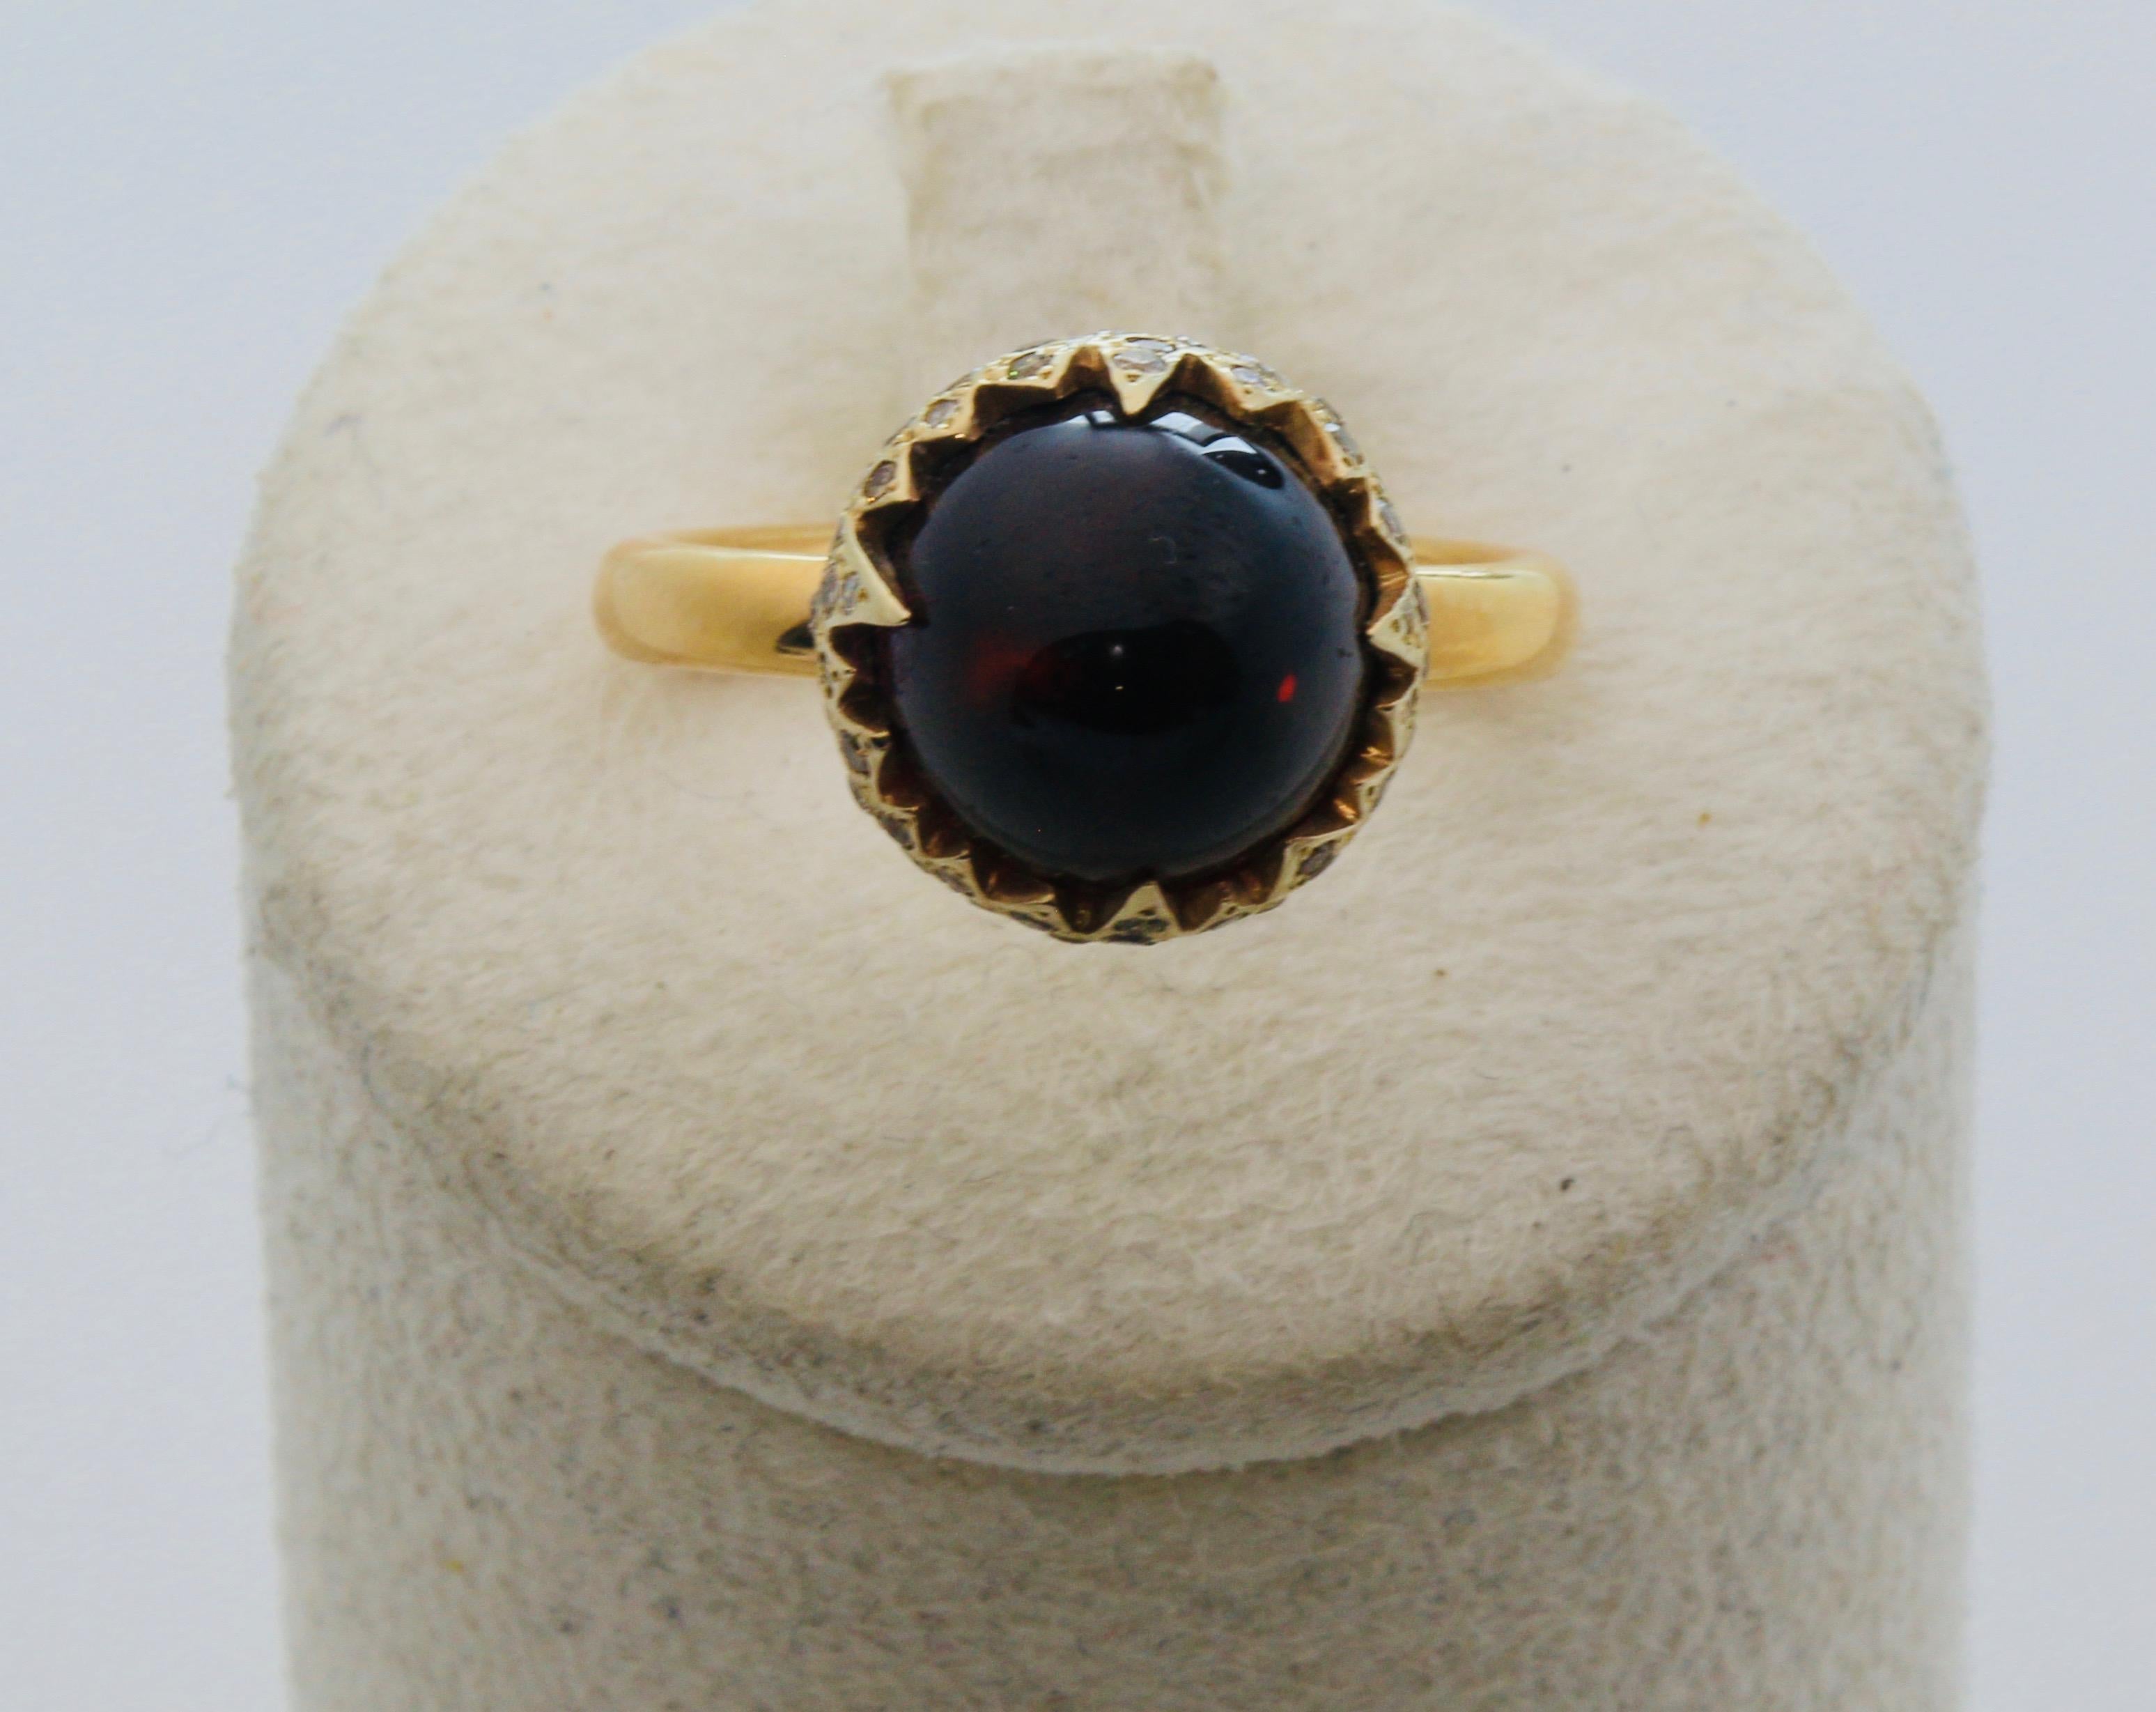 Pomellato Ring
Chimera collection
Material yellow gold 18k, Diamonds, Garnet stone Cabochon 
Weight 9,5 grams
Size US 5.75 - IT 11